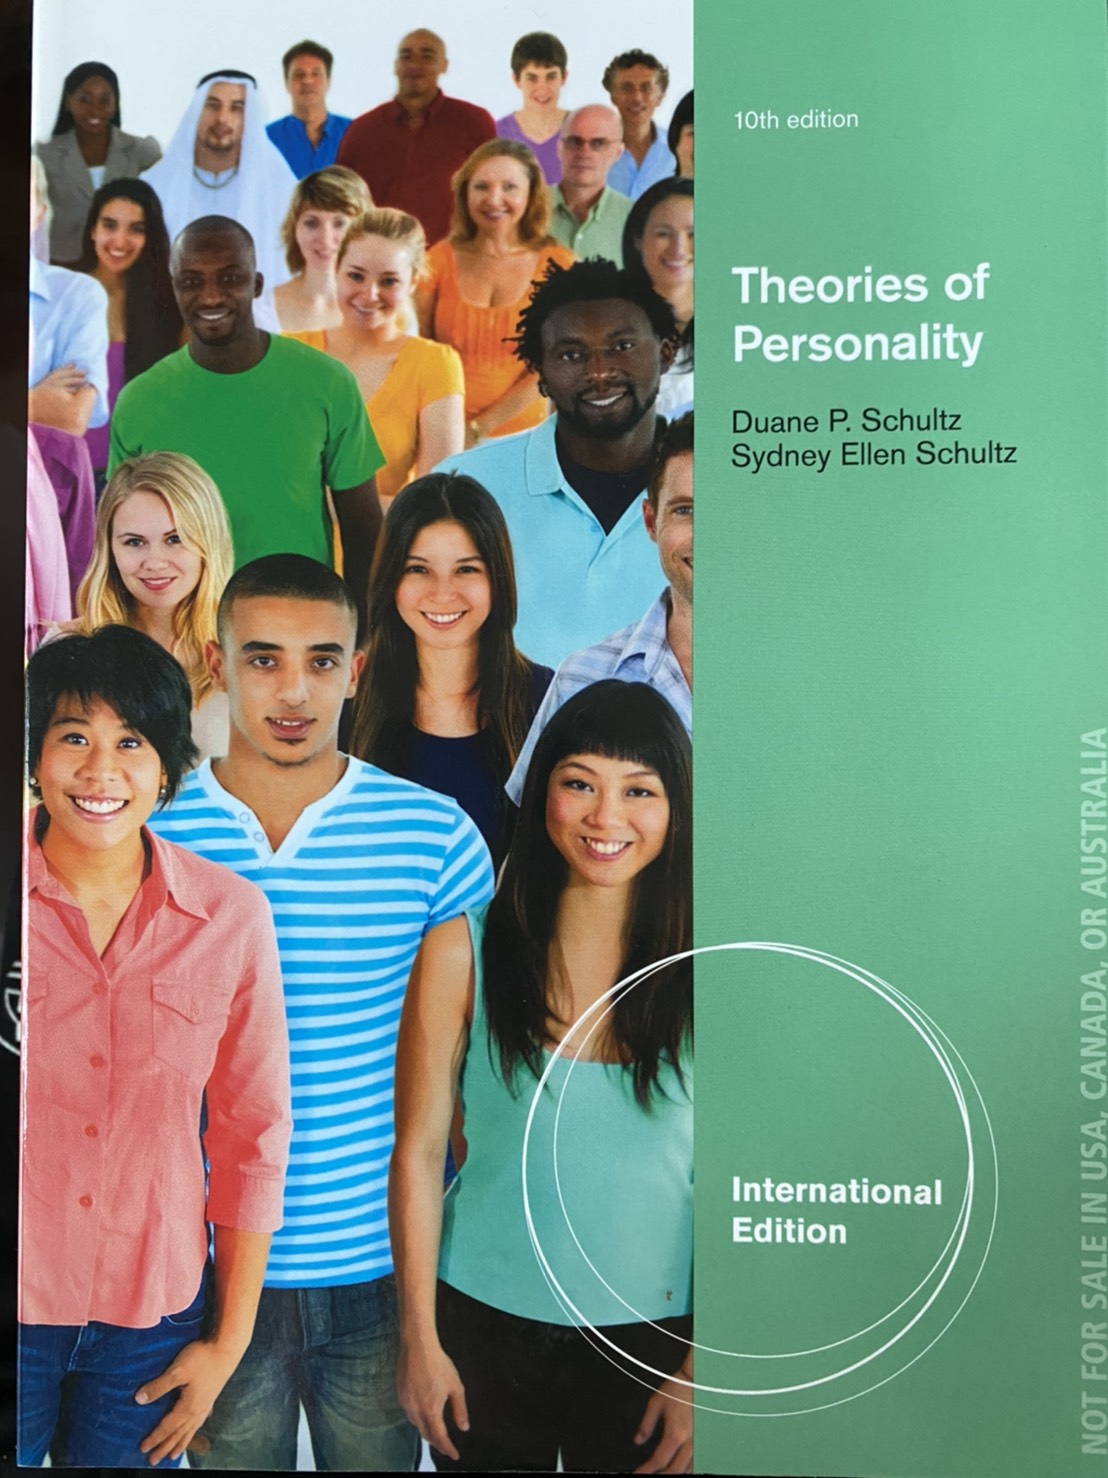 Theories of Personality 10th Edition 詳細資料